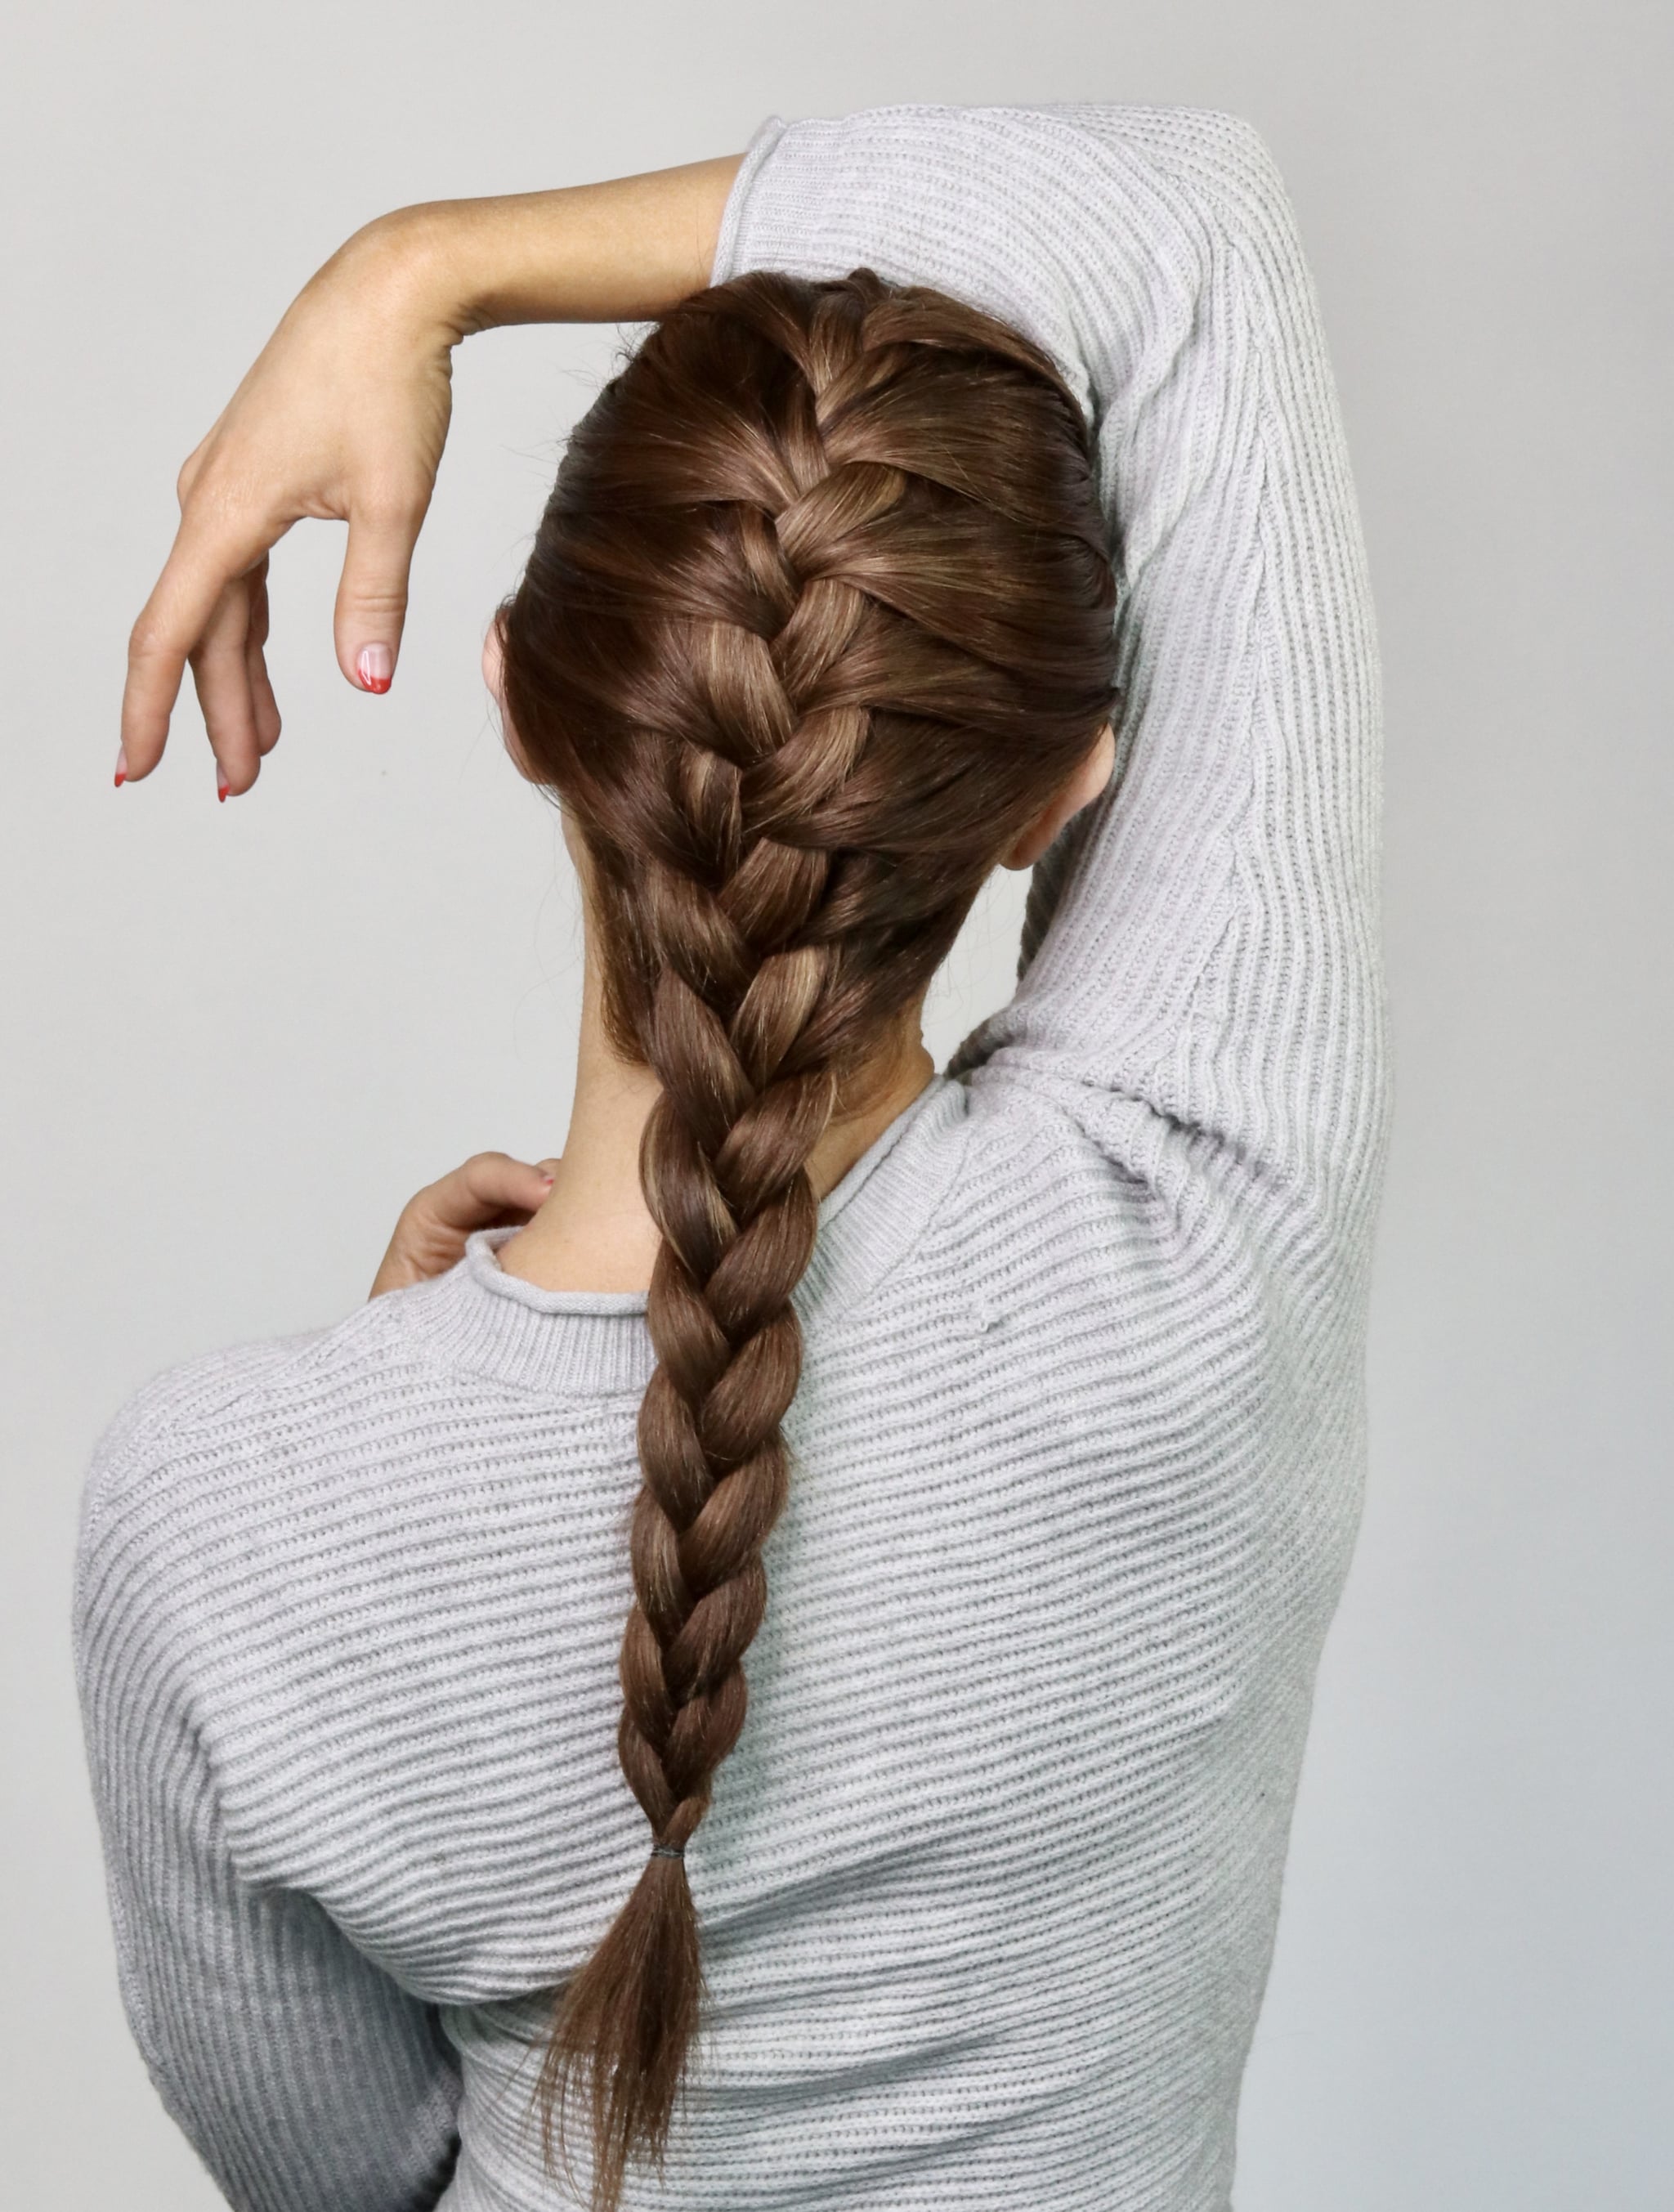 Makeup, Beauty, Hair & Skin | A Step-by-Step Guide on How to French Braid  Your Hair, Because the More You Know | POPSUGAR Beauty Photo 17